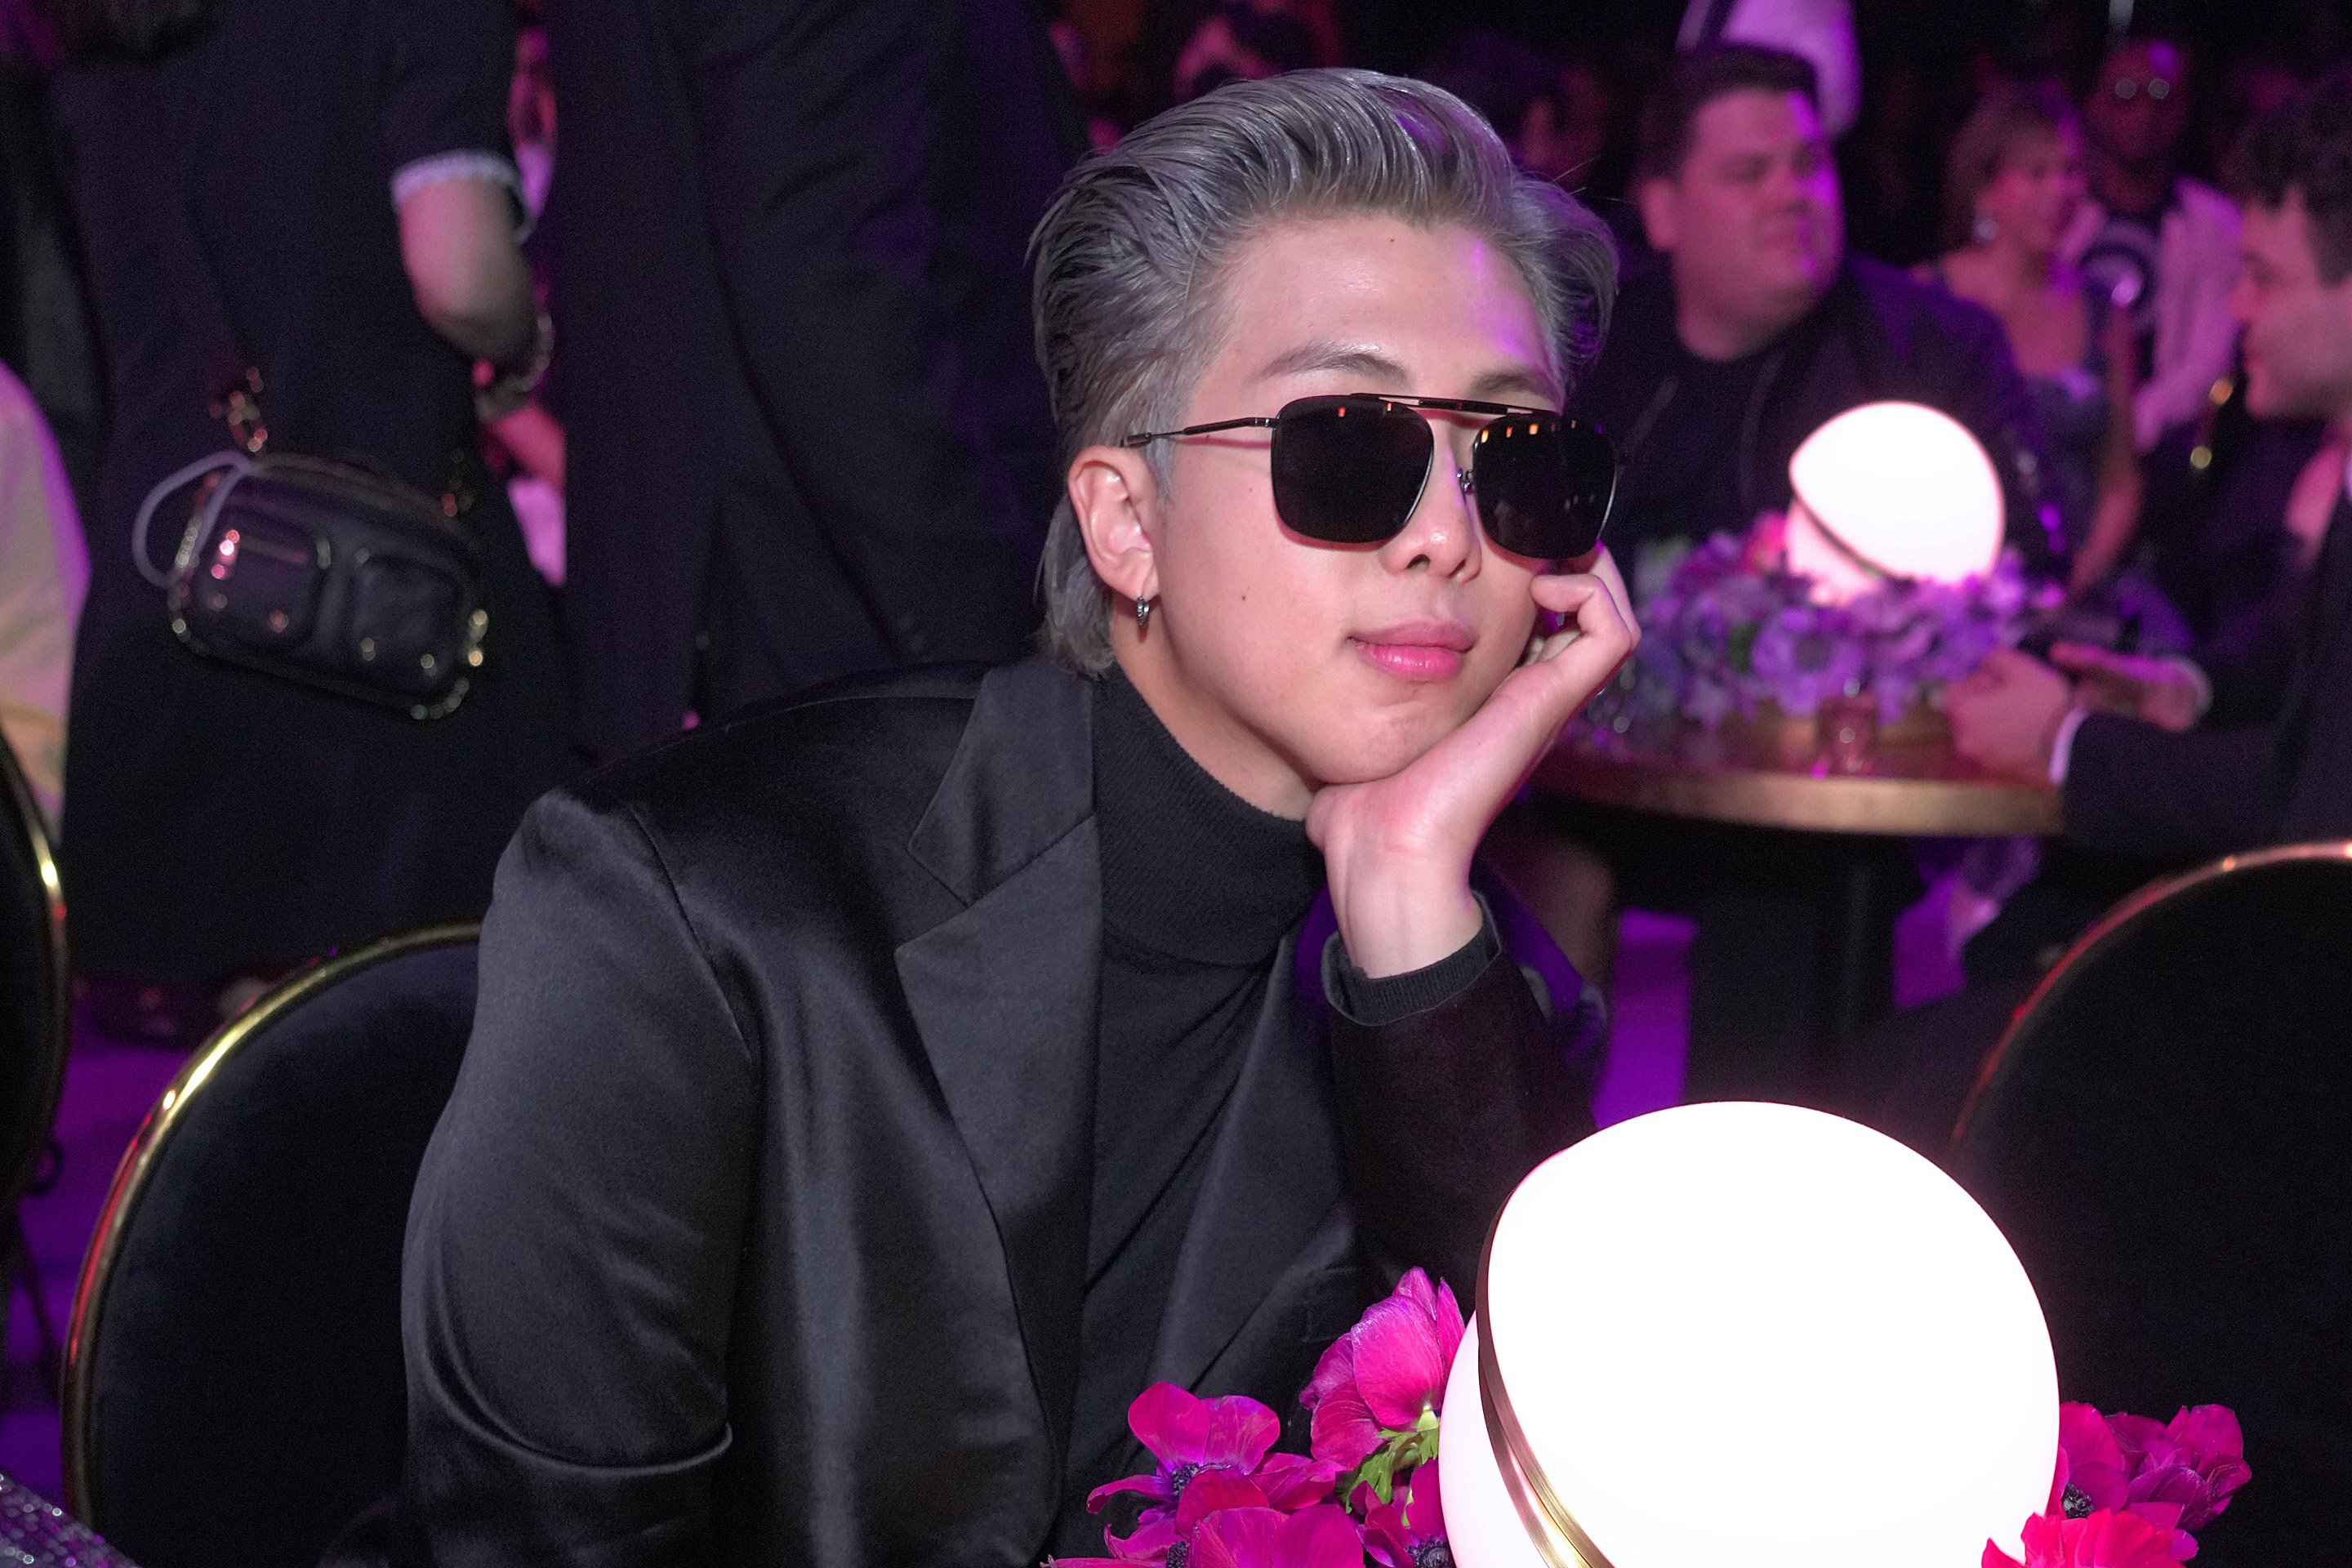 RM of BTS wearing sunglasses at the 2022 Grammy Awards